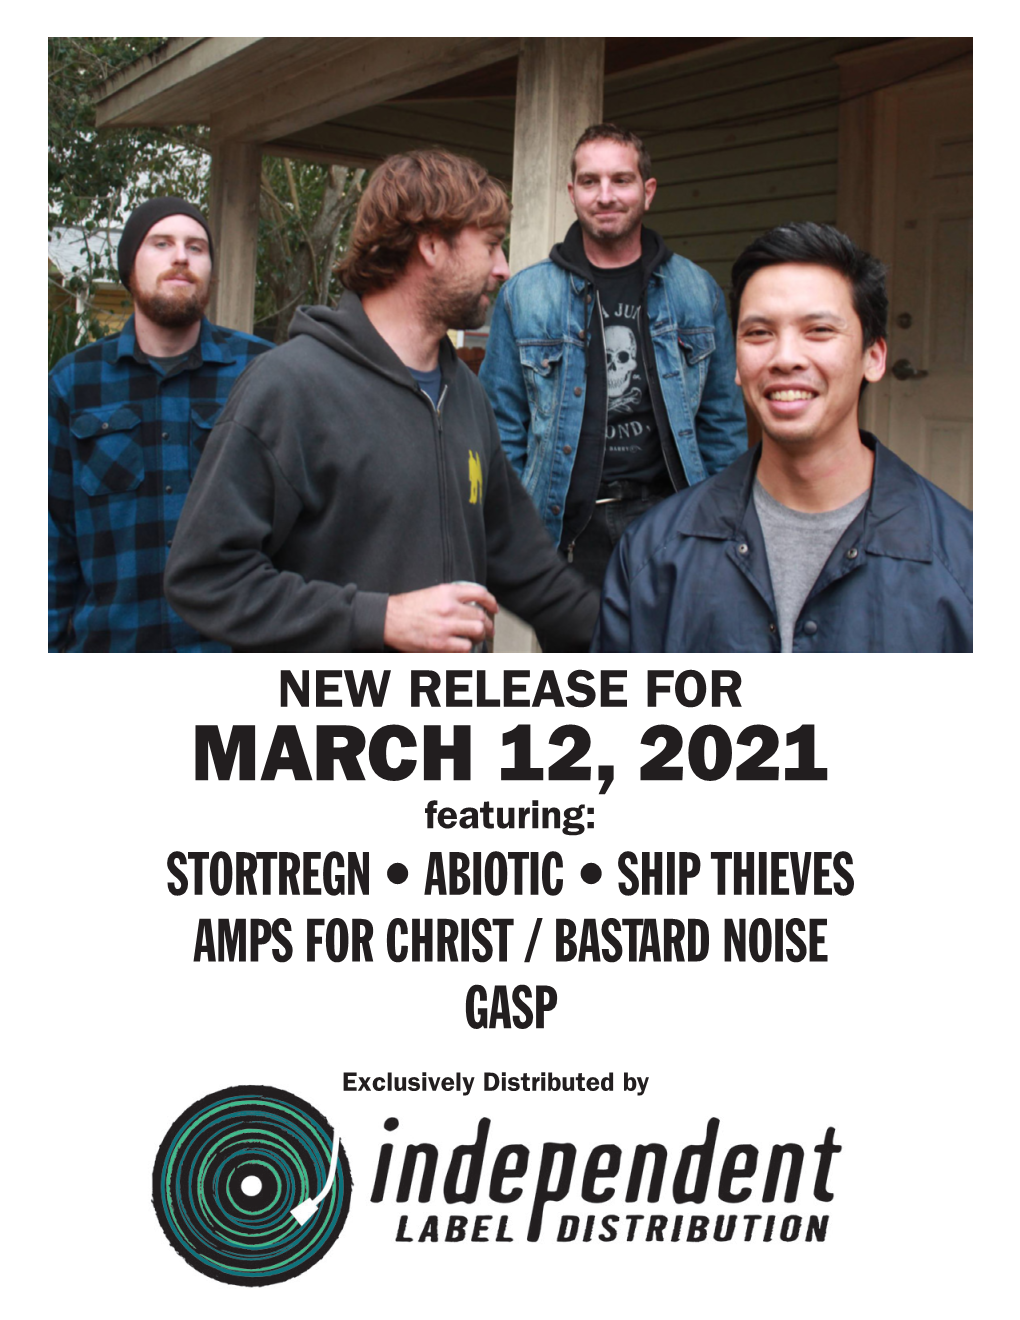 MARCH 12, 2021 Featuring: STORTREGN • ABIOTIC • SHIP THIEVES AMPS for CHRIST / BASTARD NOISE GASP